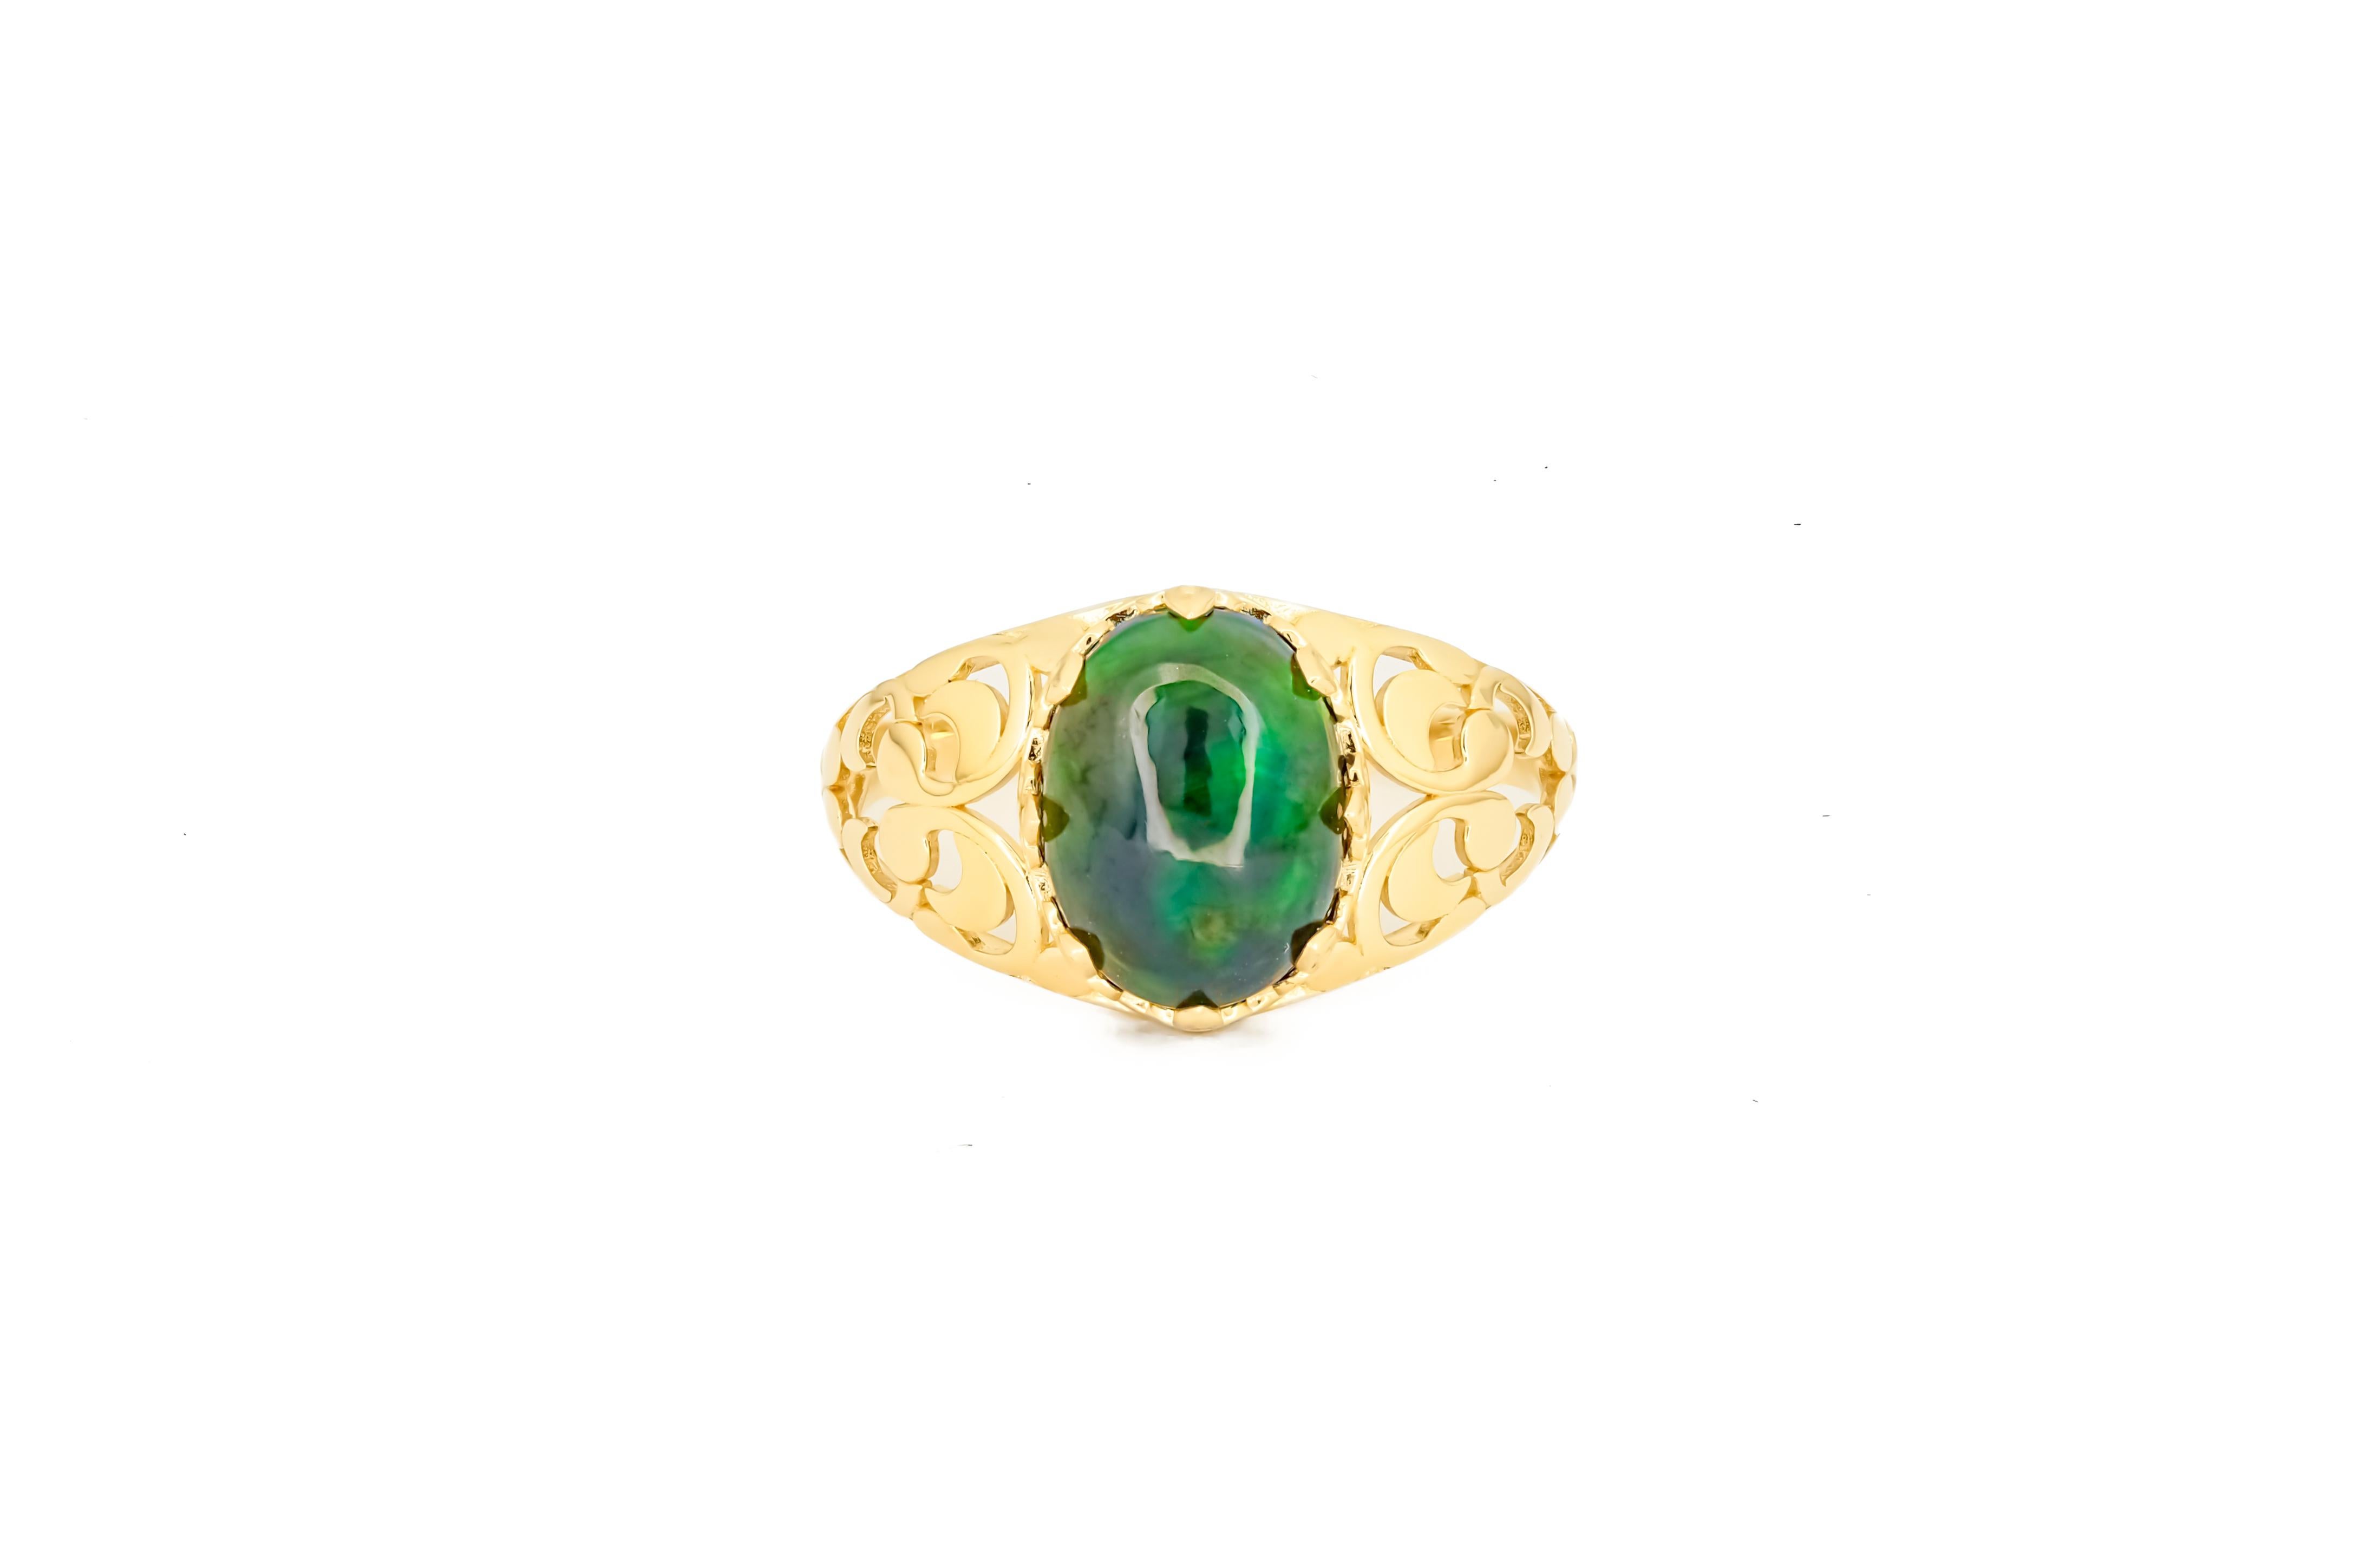 For Sale:  Black Opal Vitage Style Ring in 14 Karat Gold, Ethiopian Opal Cabochon Ring 2